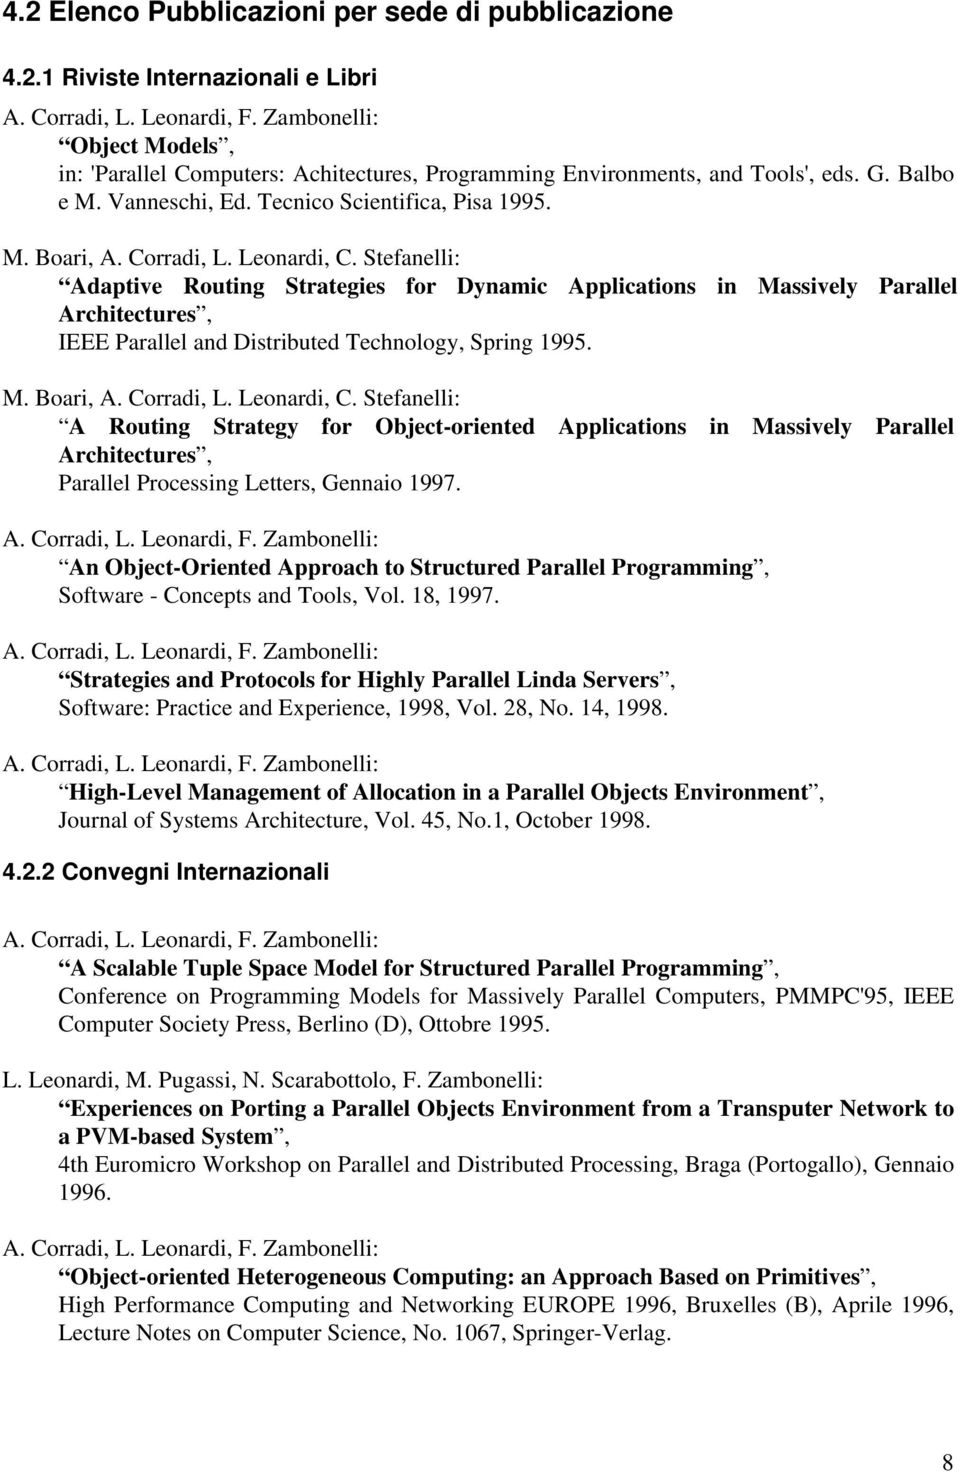 Stefanelli: Adaptive Routing Strategies for Dynamic Applications in Massively Parallel Architectures, IEEE Parallel and Distributed Technology, Spring 1995. M. Boari, A. Corradi, L. Leonardi, C.